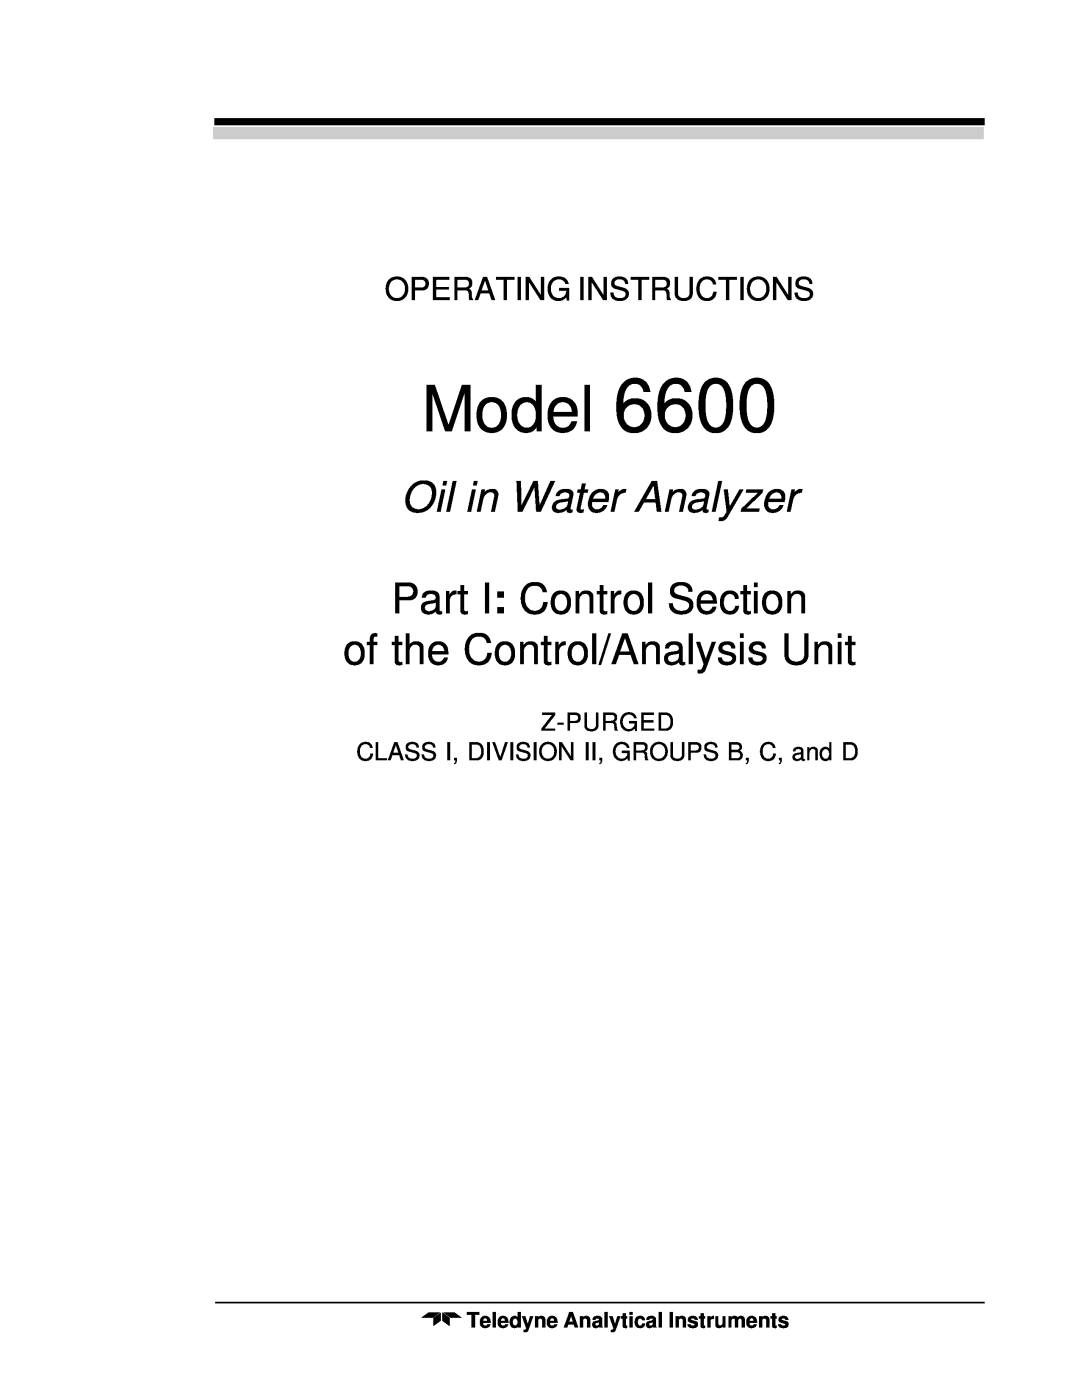 Teledyne 6600 Model, Oil in Water Analyzer, Part I: Control Section, of the Control/Analysis Unit, Operating Instructions 